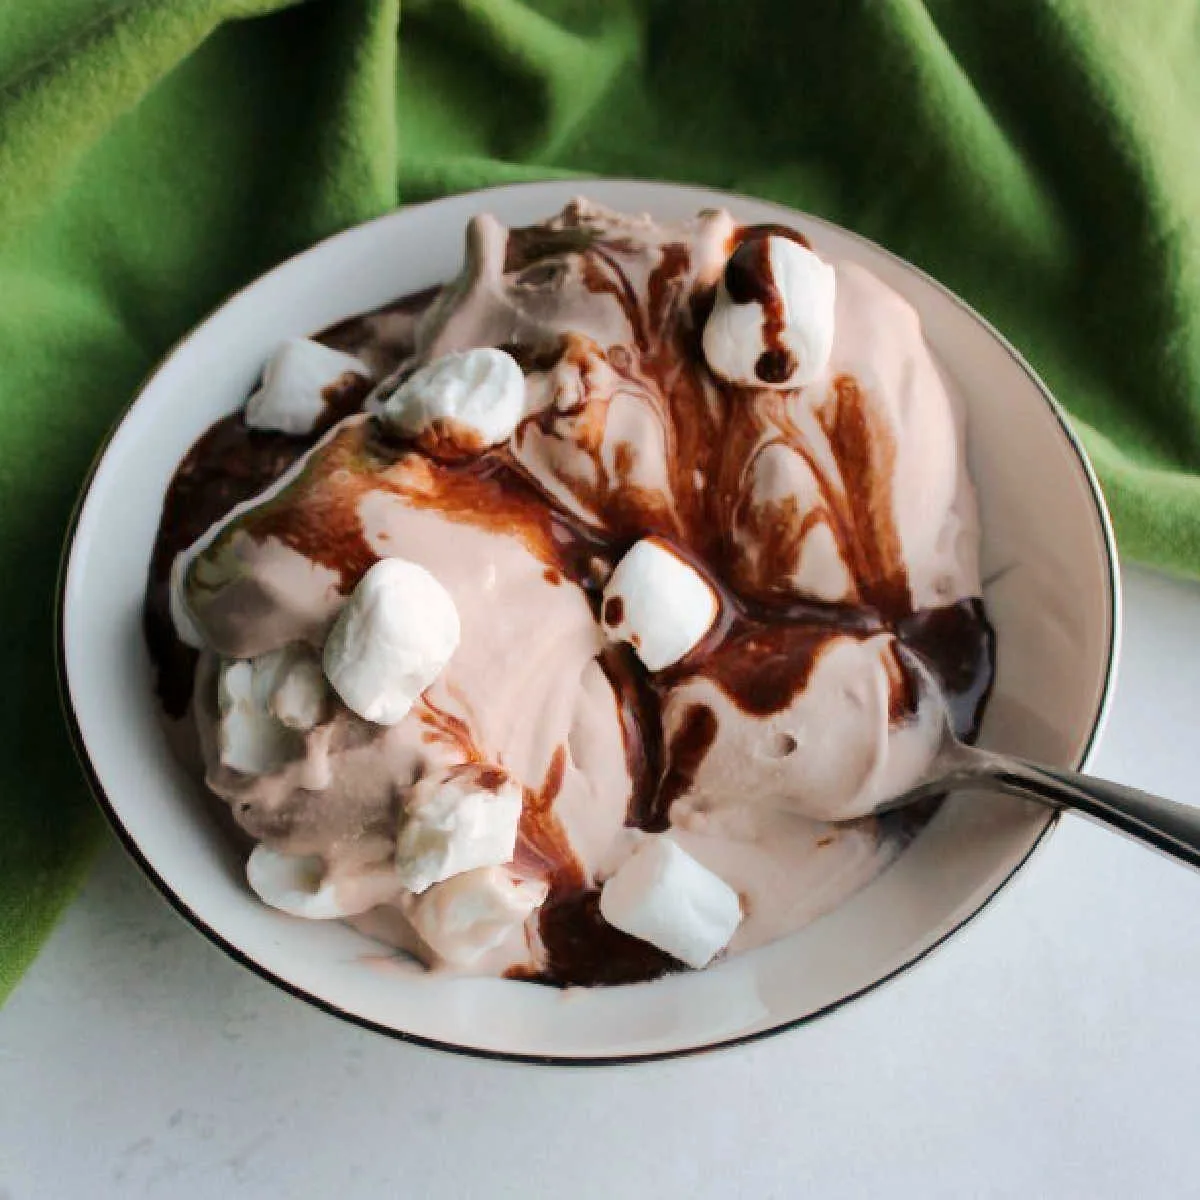 bowl of chocolate ice cream with marshmallows and hot fudge.